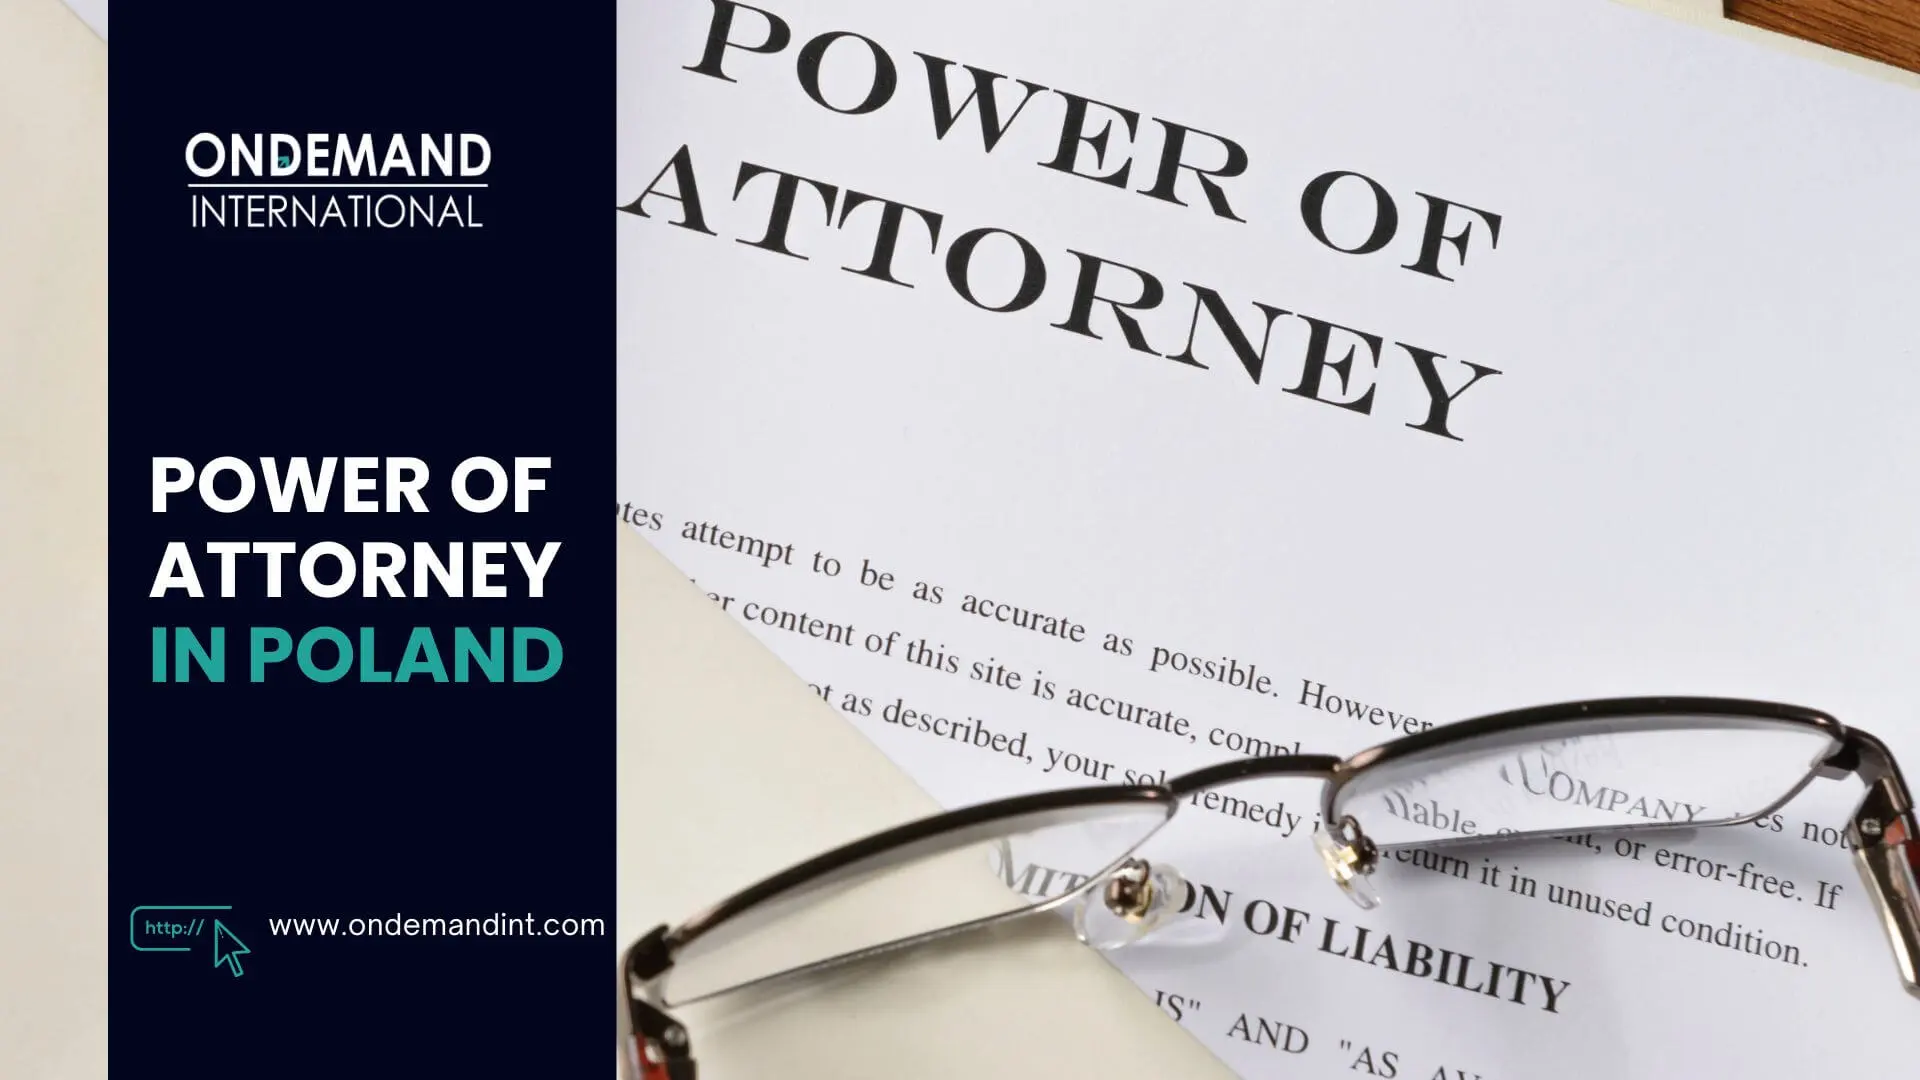 Power of Attorney in Poland: Uses & Advantages